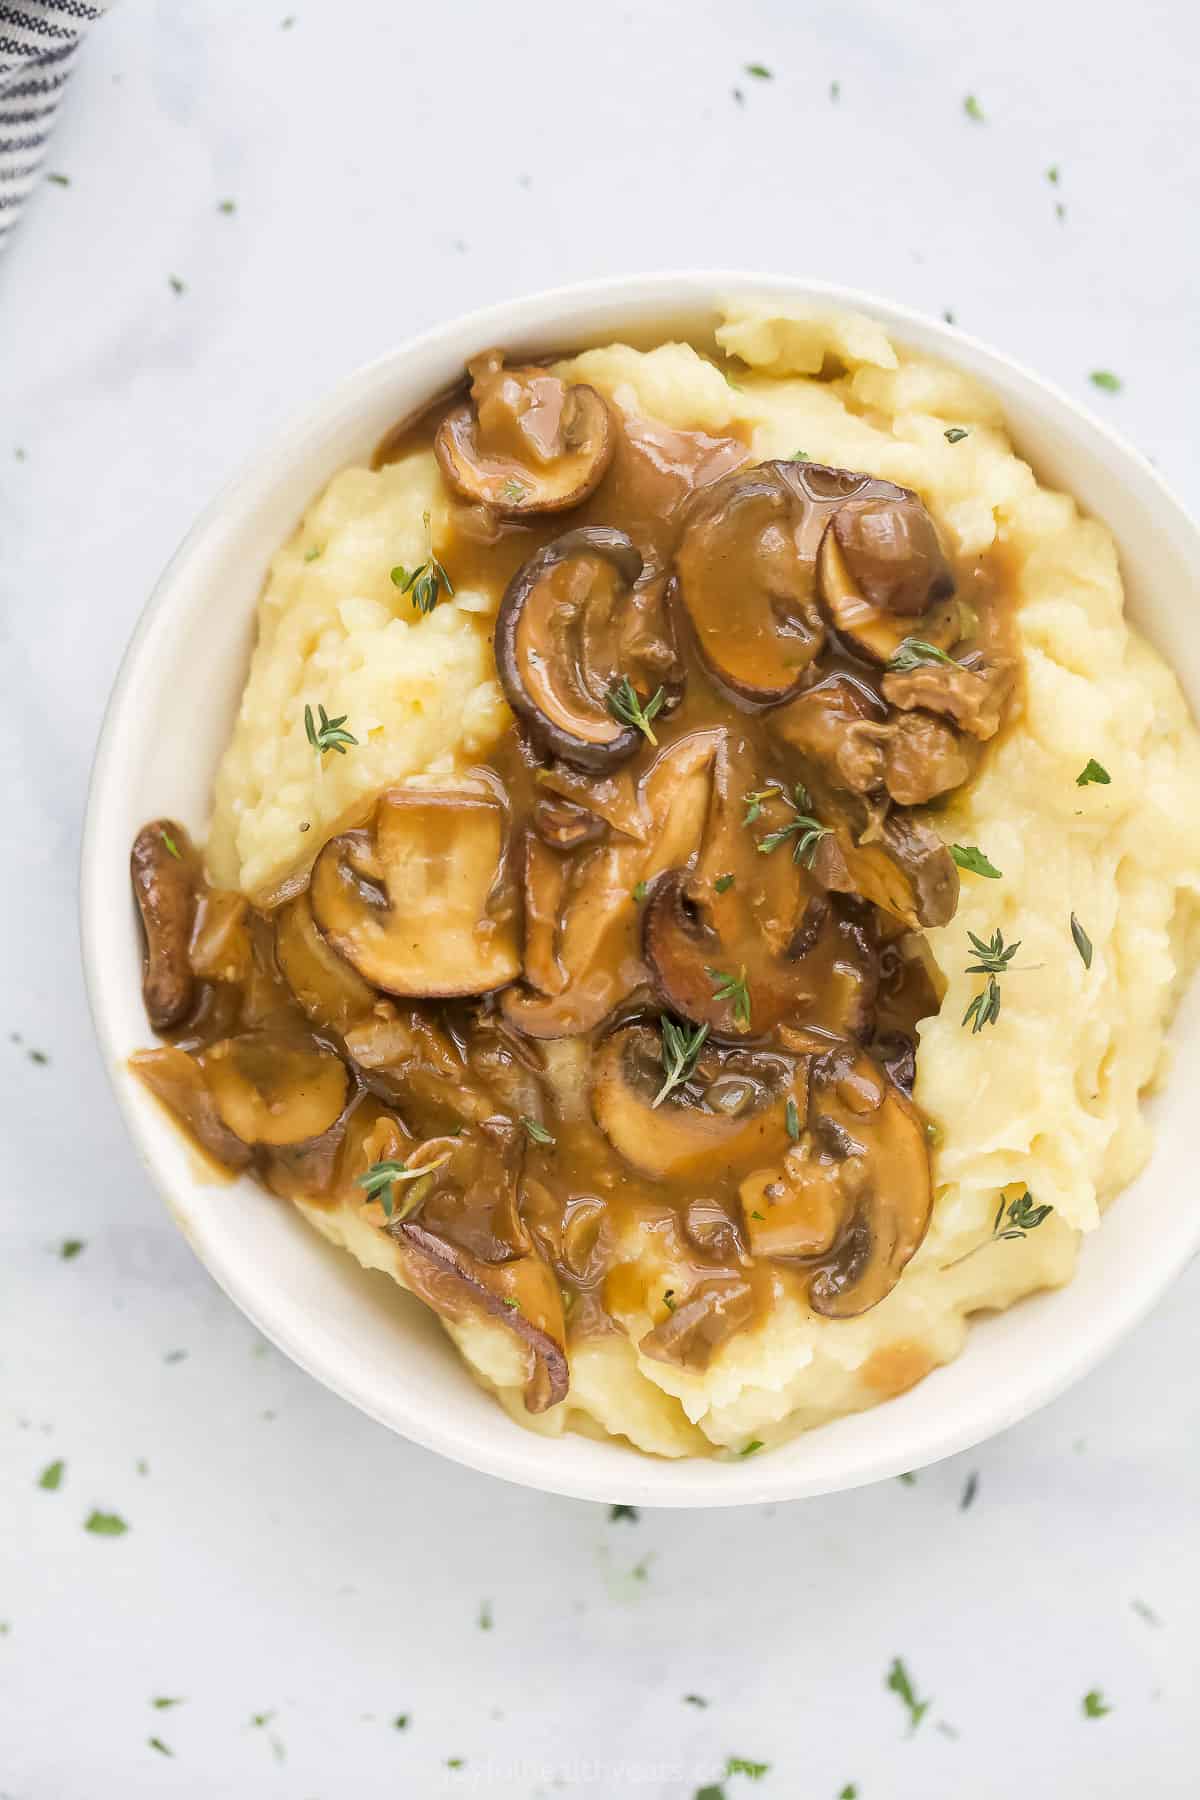 A bowl of mashed potatoes topped with a helping of mushroom gravy